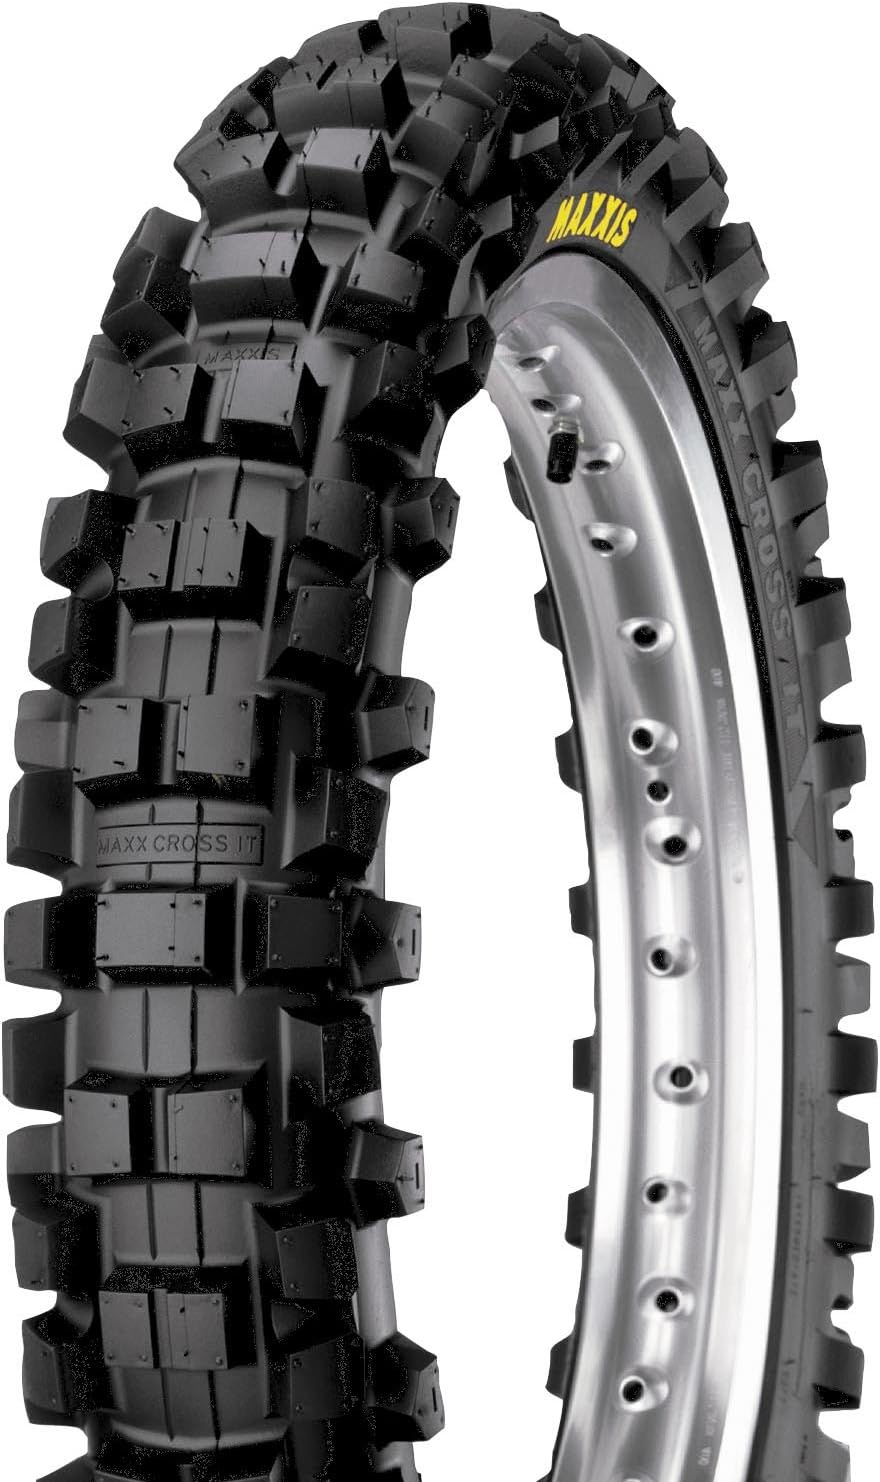 Comparison of Offroad Tires and Electric Bike for Adventurous Riders